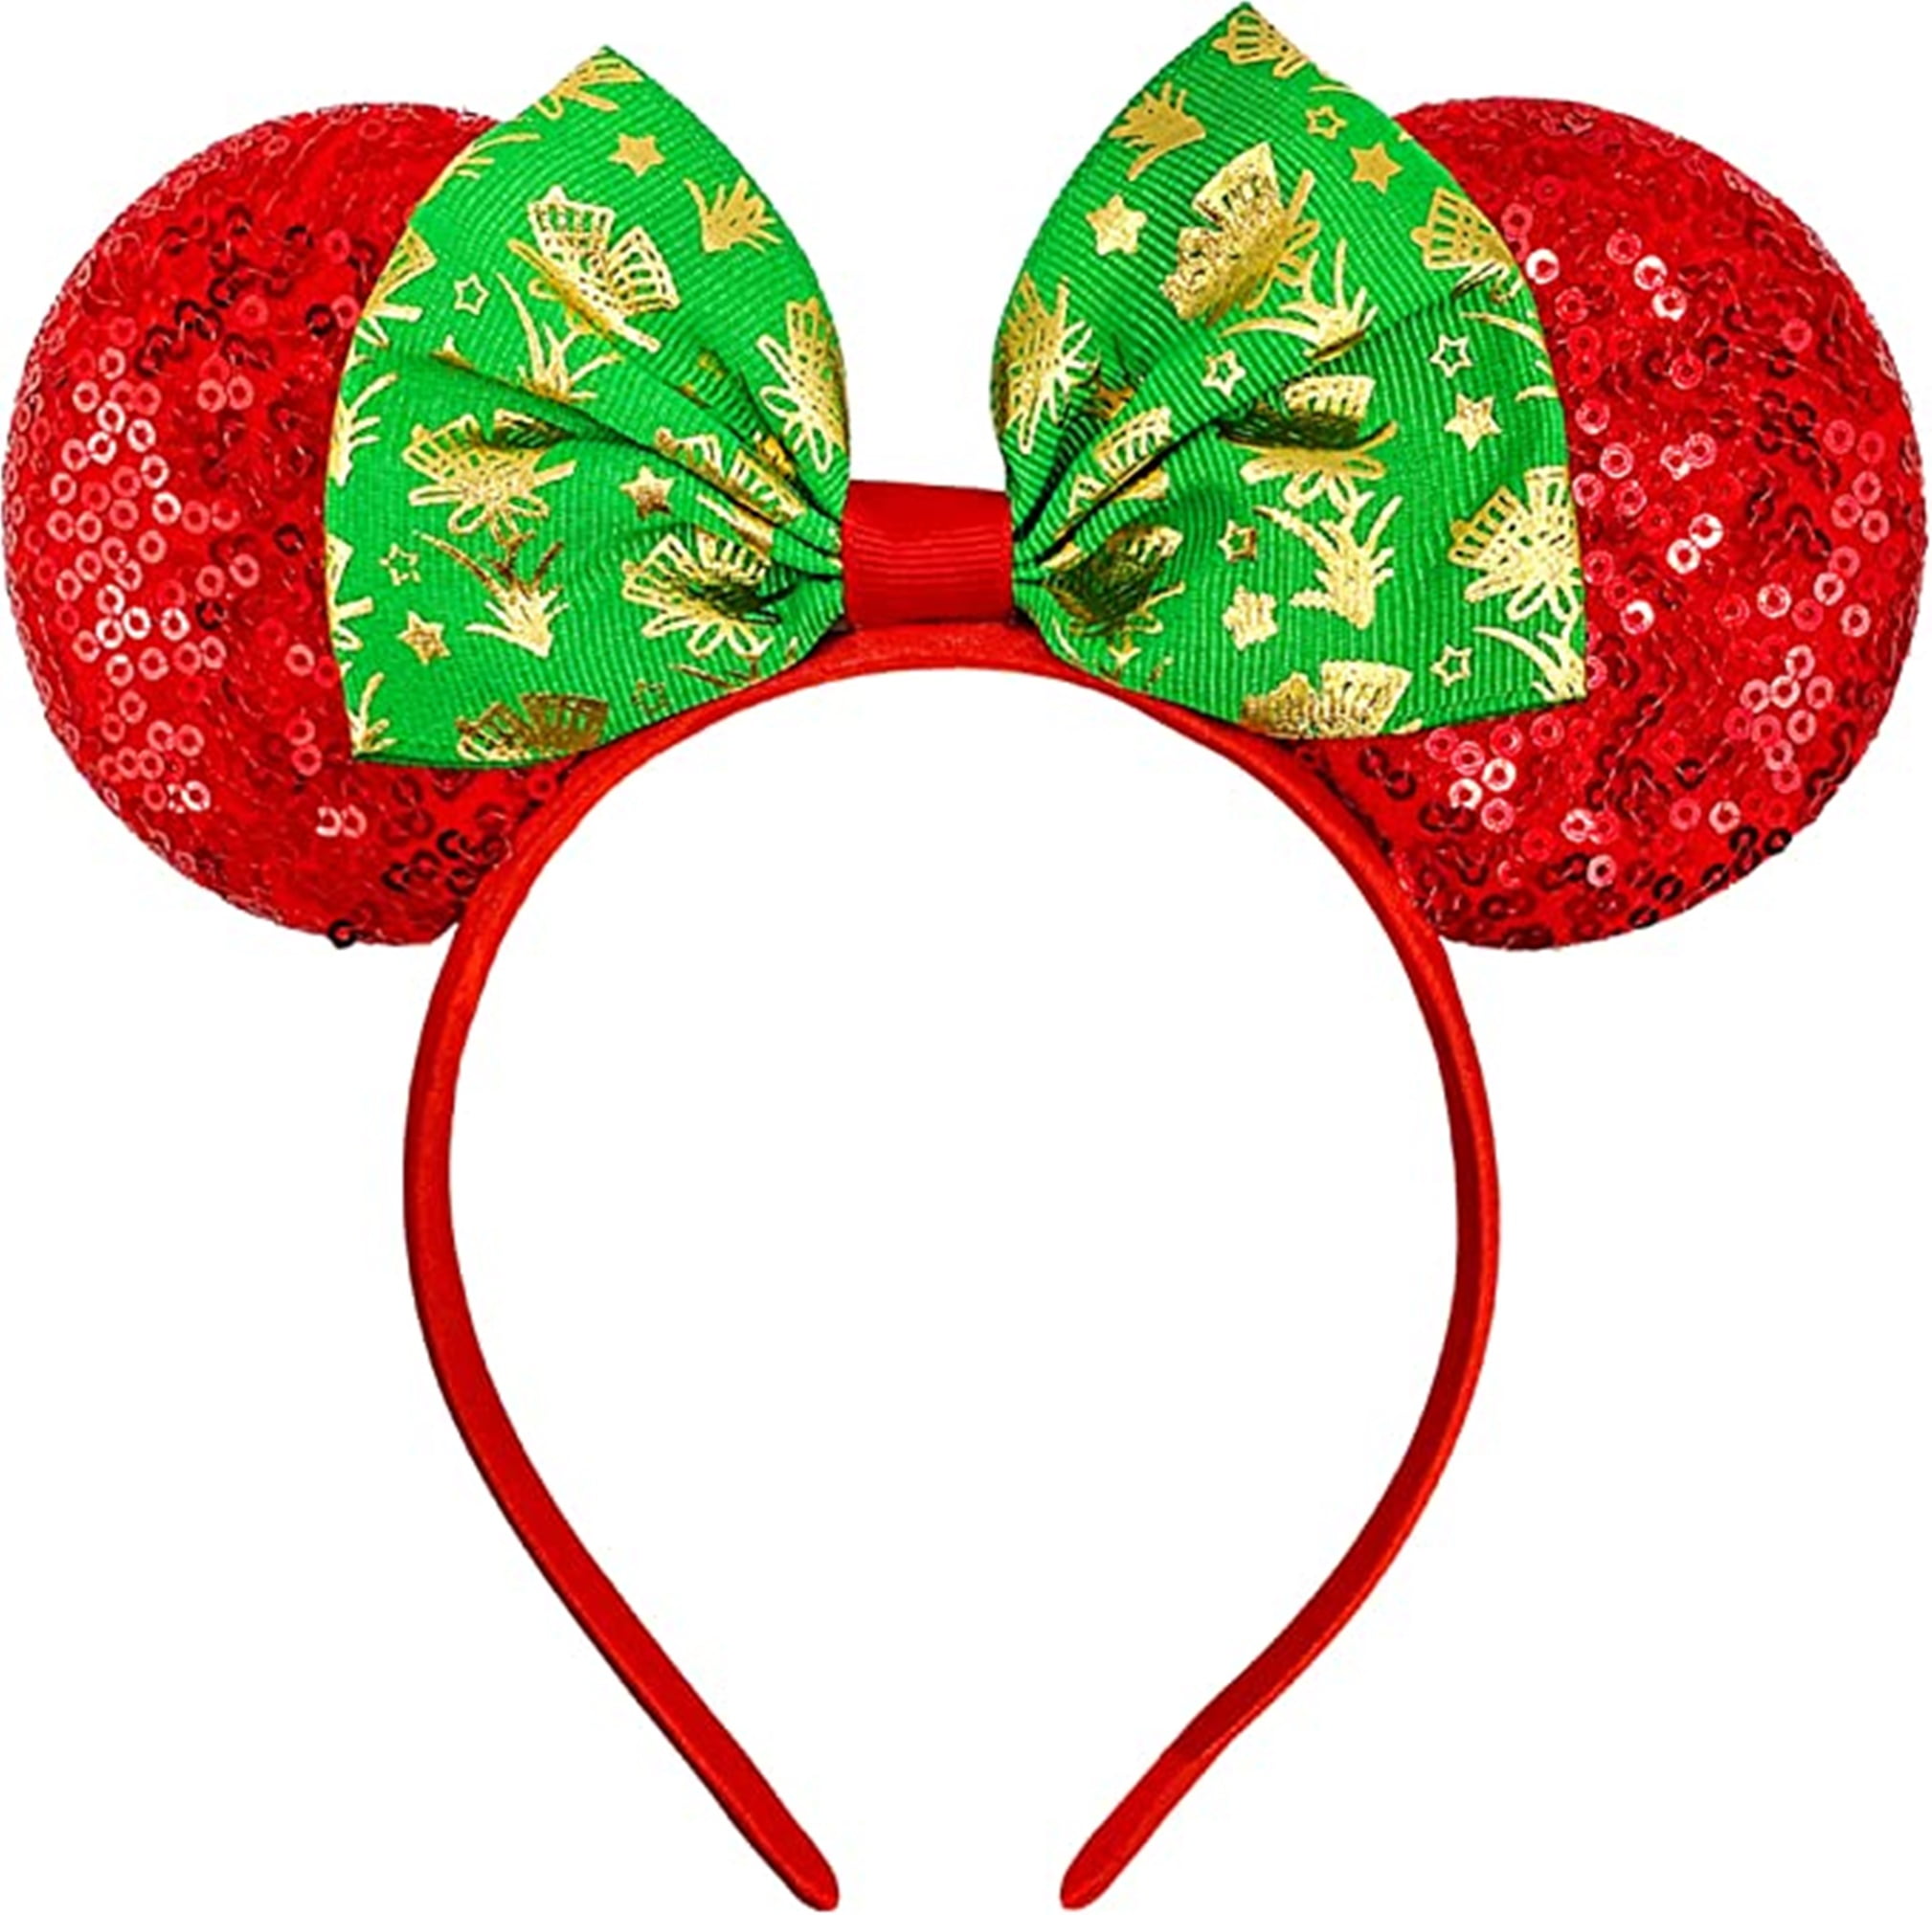 Needzo Red and White Striped Christmas Mouse Ear Headband with Green Bow, Sequin Festive Holiday Hair Accessory for Women or Girls, One Size Fits Most